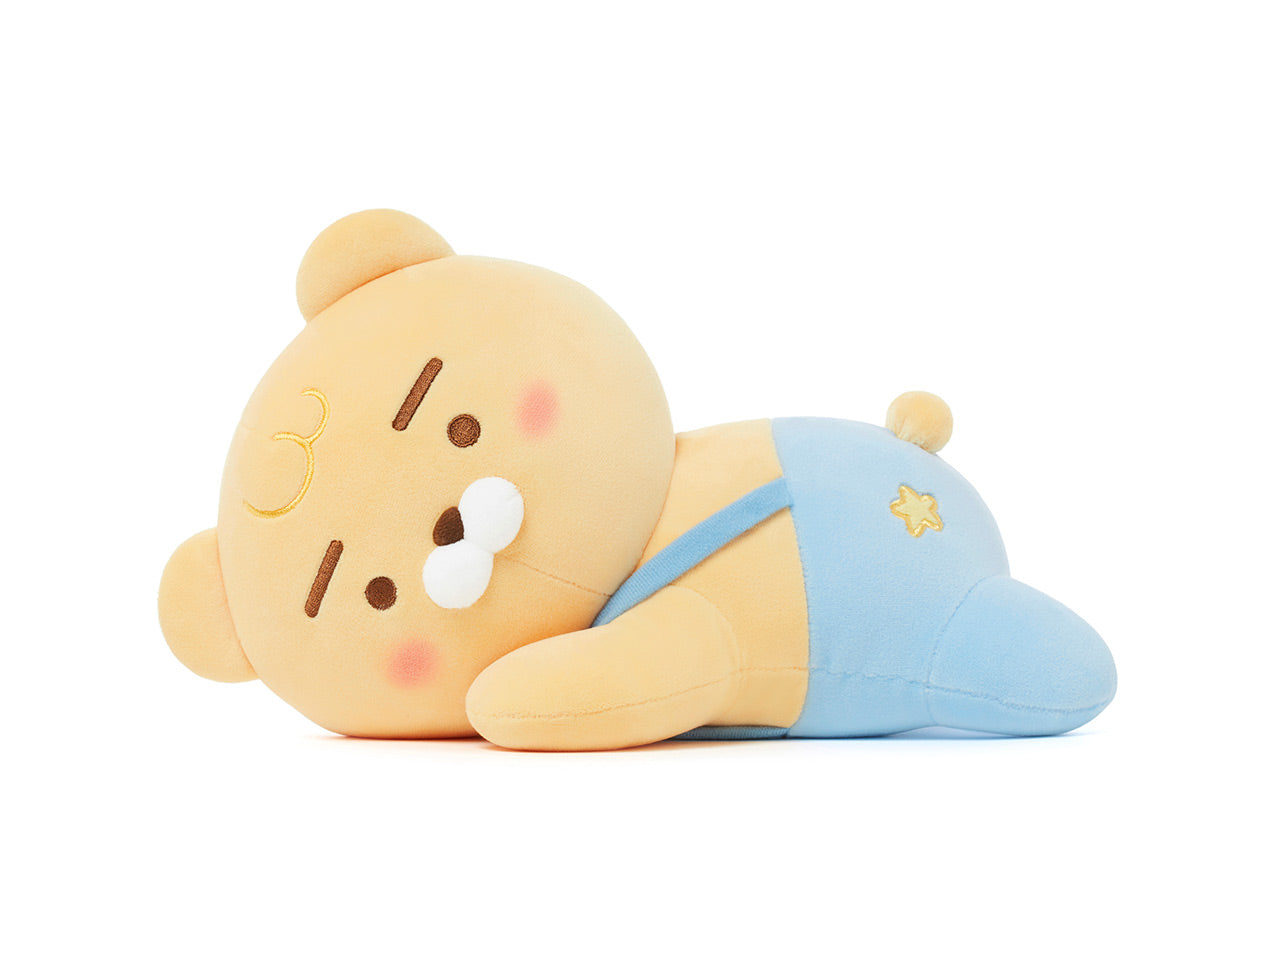 kakao friends ryan in skyblue overall plush toy front